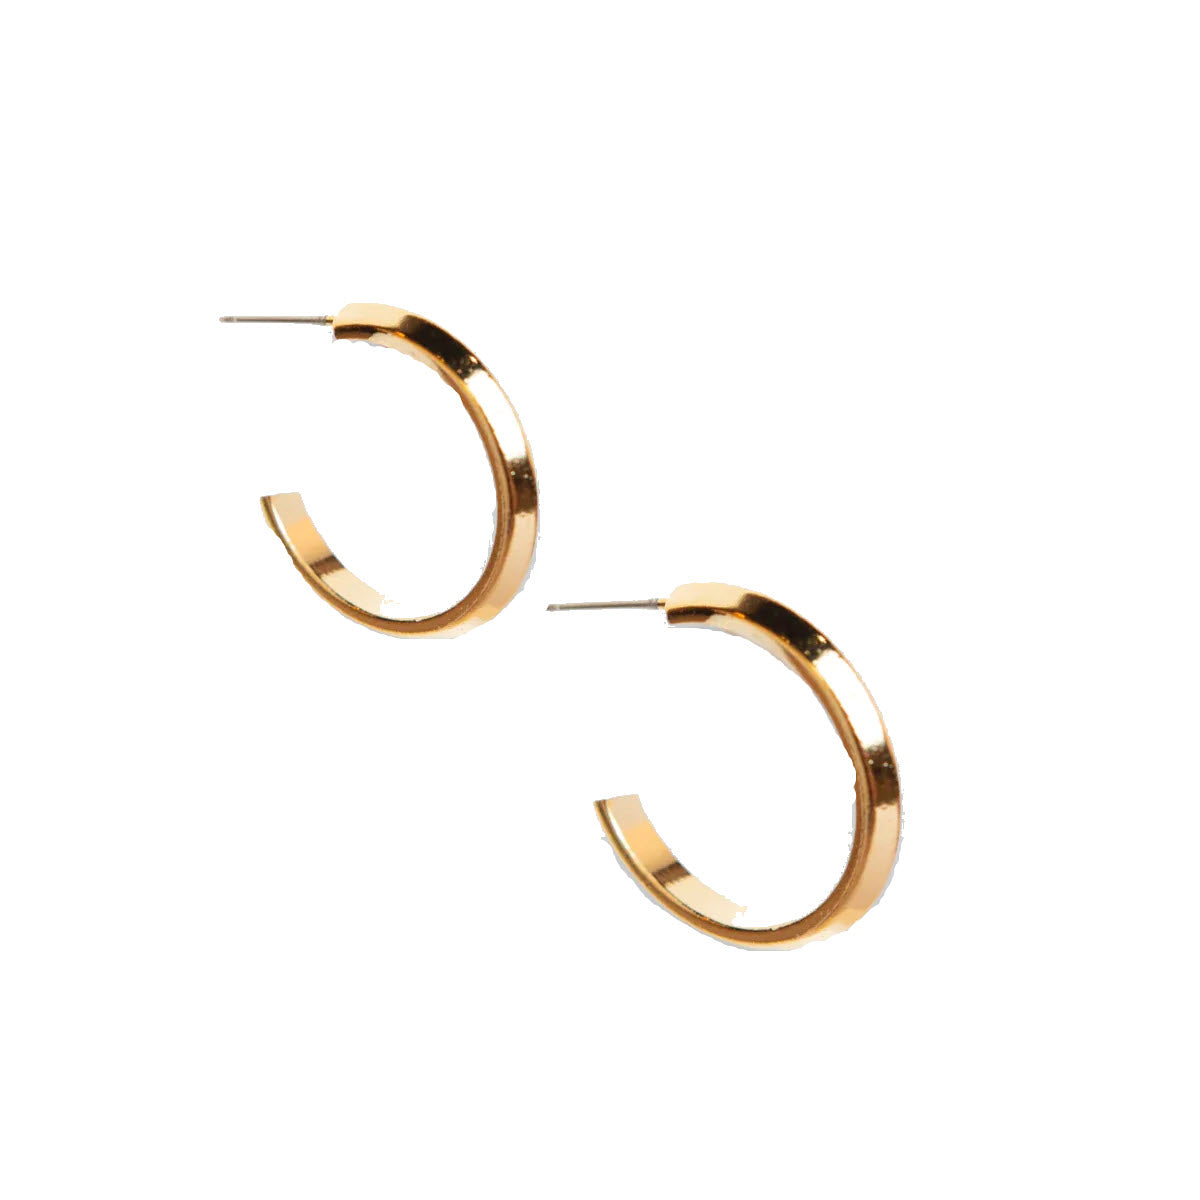 A pair of Lenny and Eva Classic Hoop Earrings Gold on a white background.